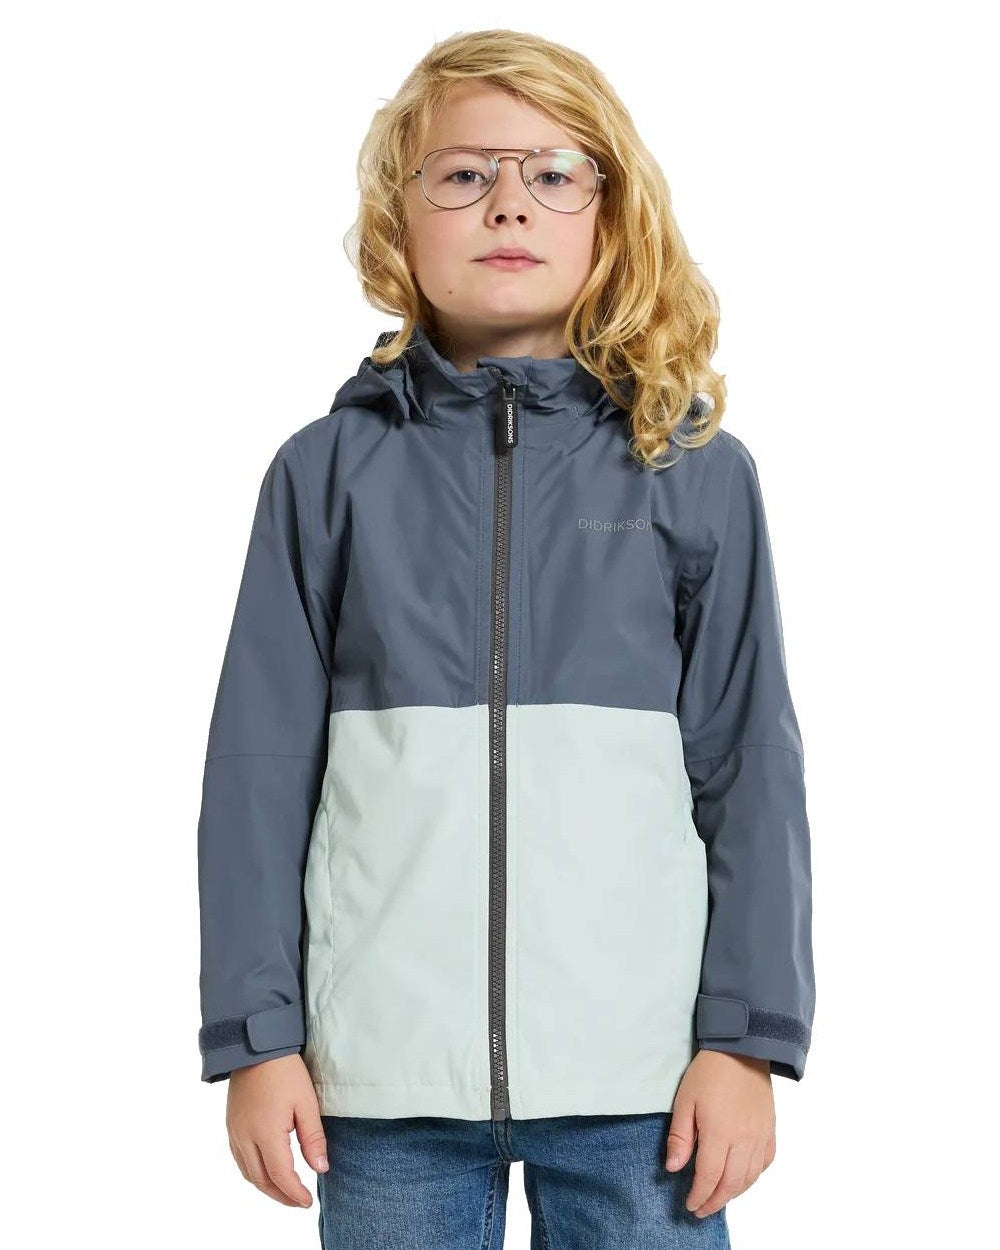 Pale Mint Coloured Didriksons Piko Childrens Jacket On A White Background 